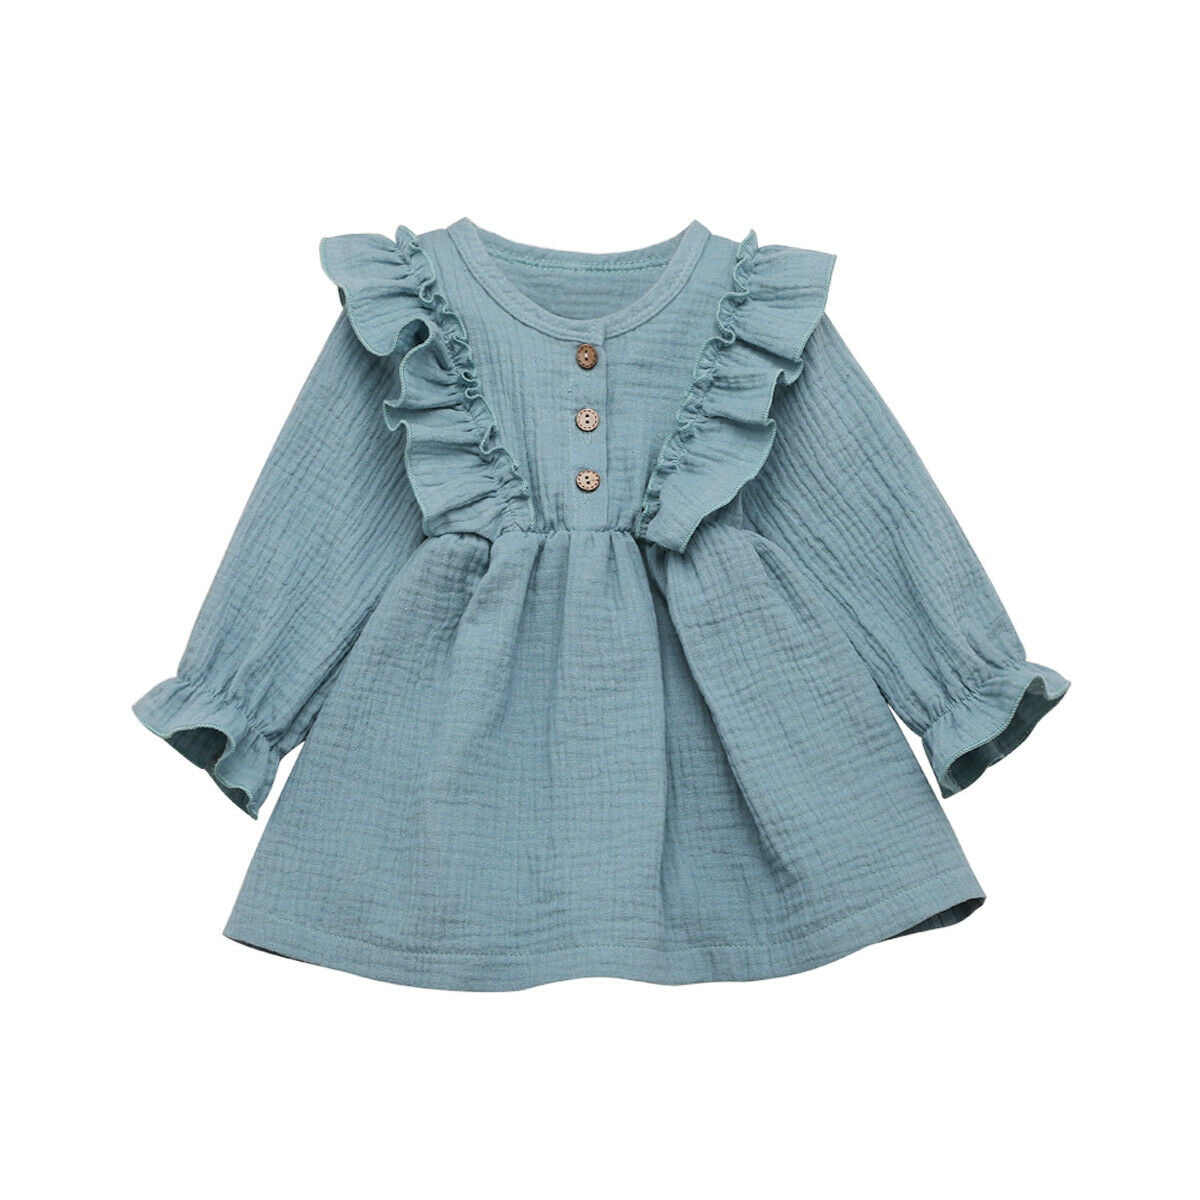 YOUNGER STAR Toddler Baby Girl Cotton Linen Long Sleeve Ruffle Dress Kids Fall Dresses Clothes 